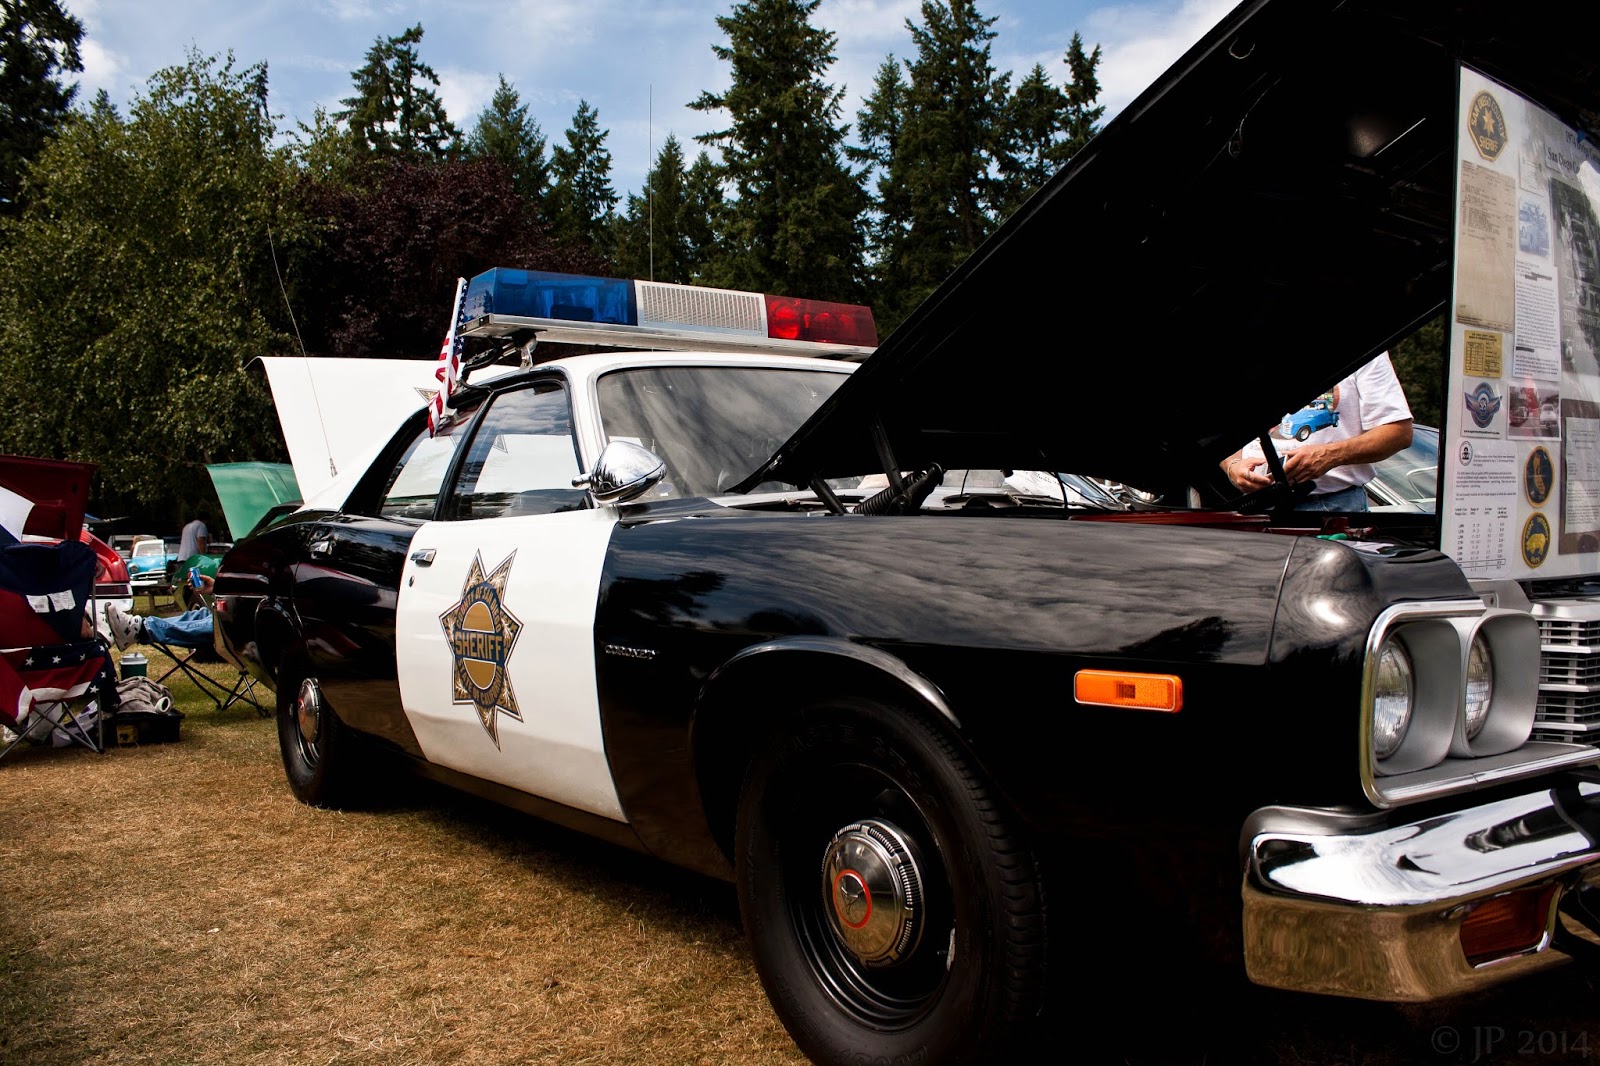 From the Archives: Graham, WA Sunbust Mopar Show